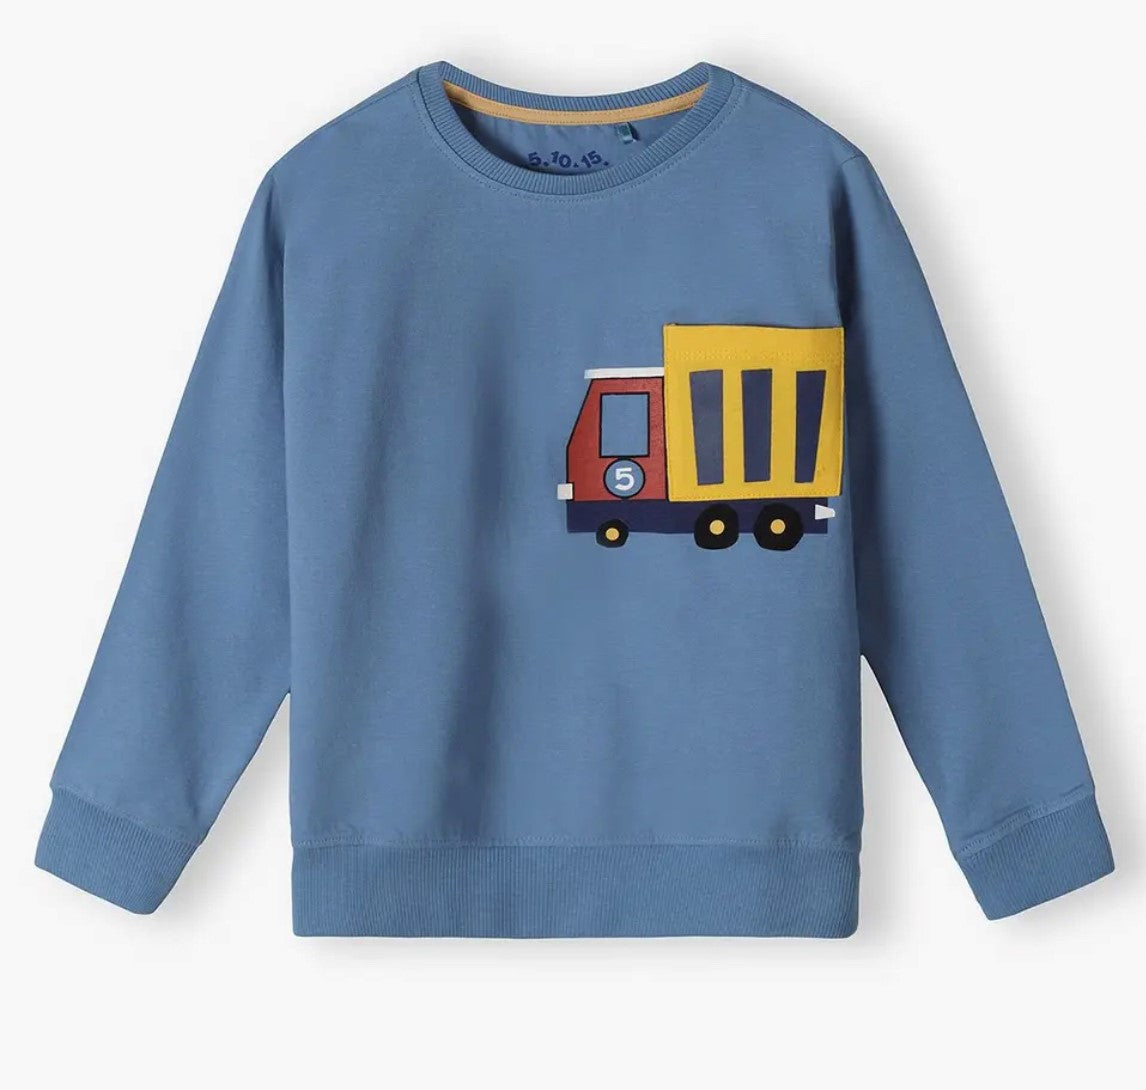 Blue sweater with a lorry